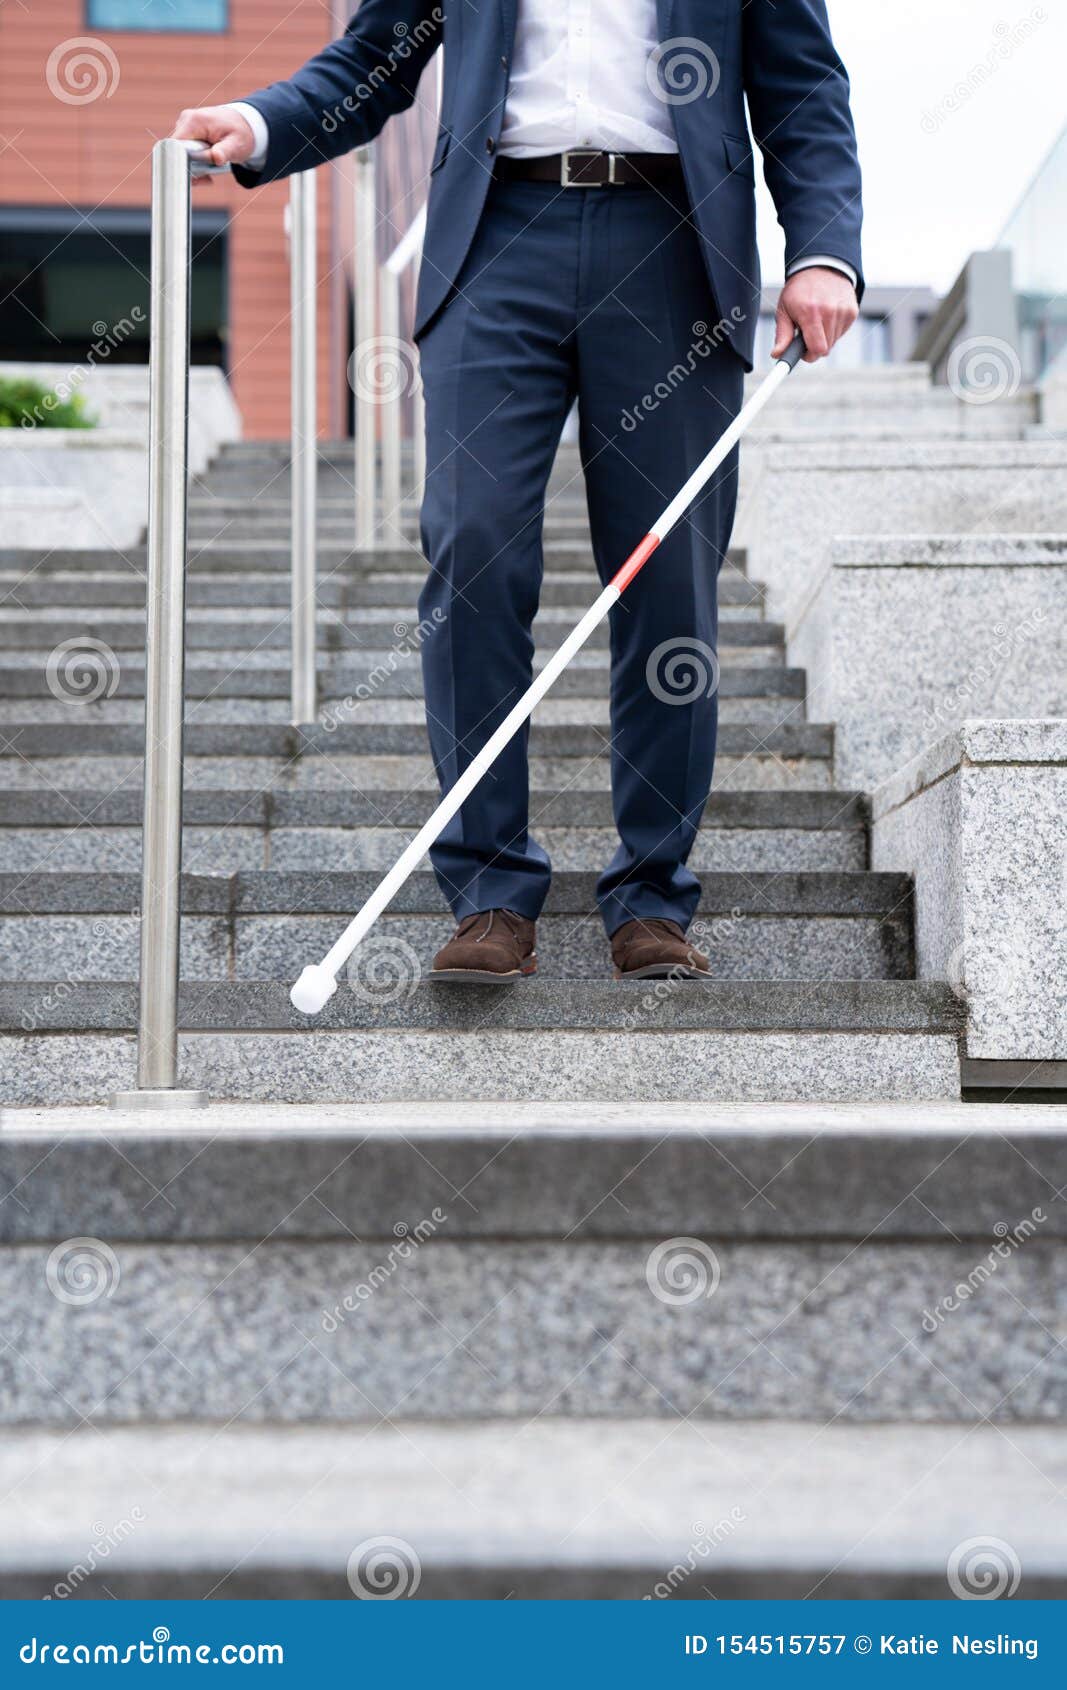 Close Up of Blind Person Negotiating Steps Outdoors Using Cane